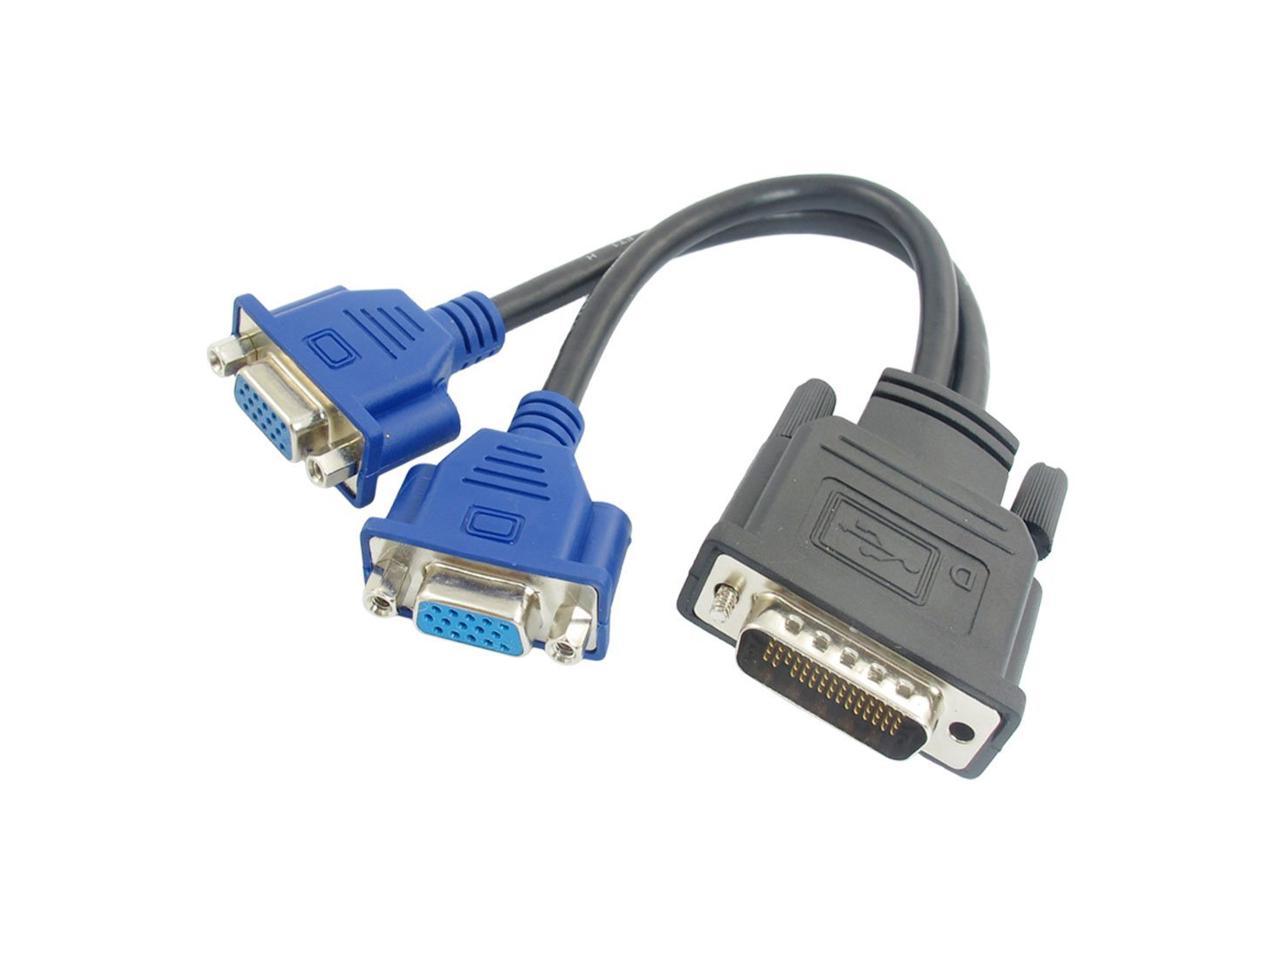 Lot of 2 Computer Video Adapter DMS 59 Y Splitter to Dual DVI-I Dual Link 